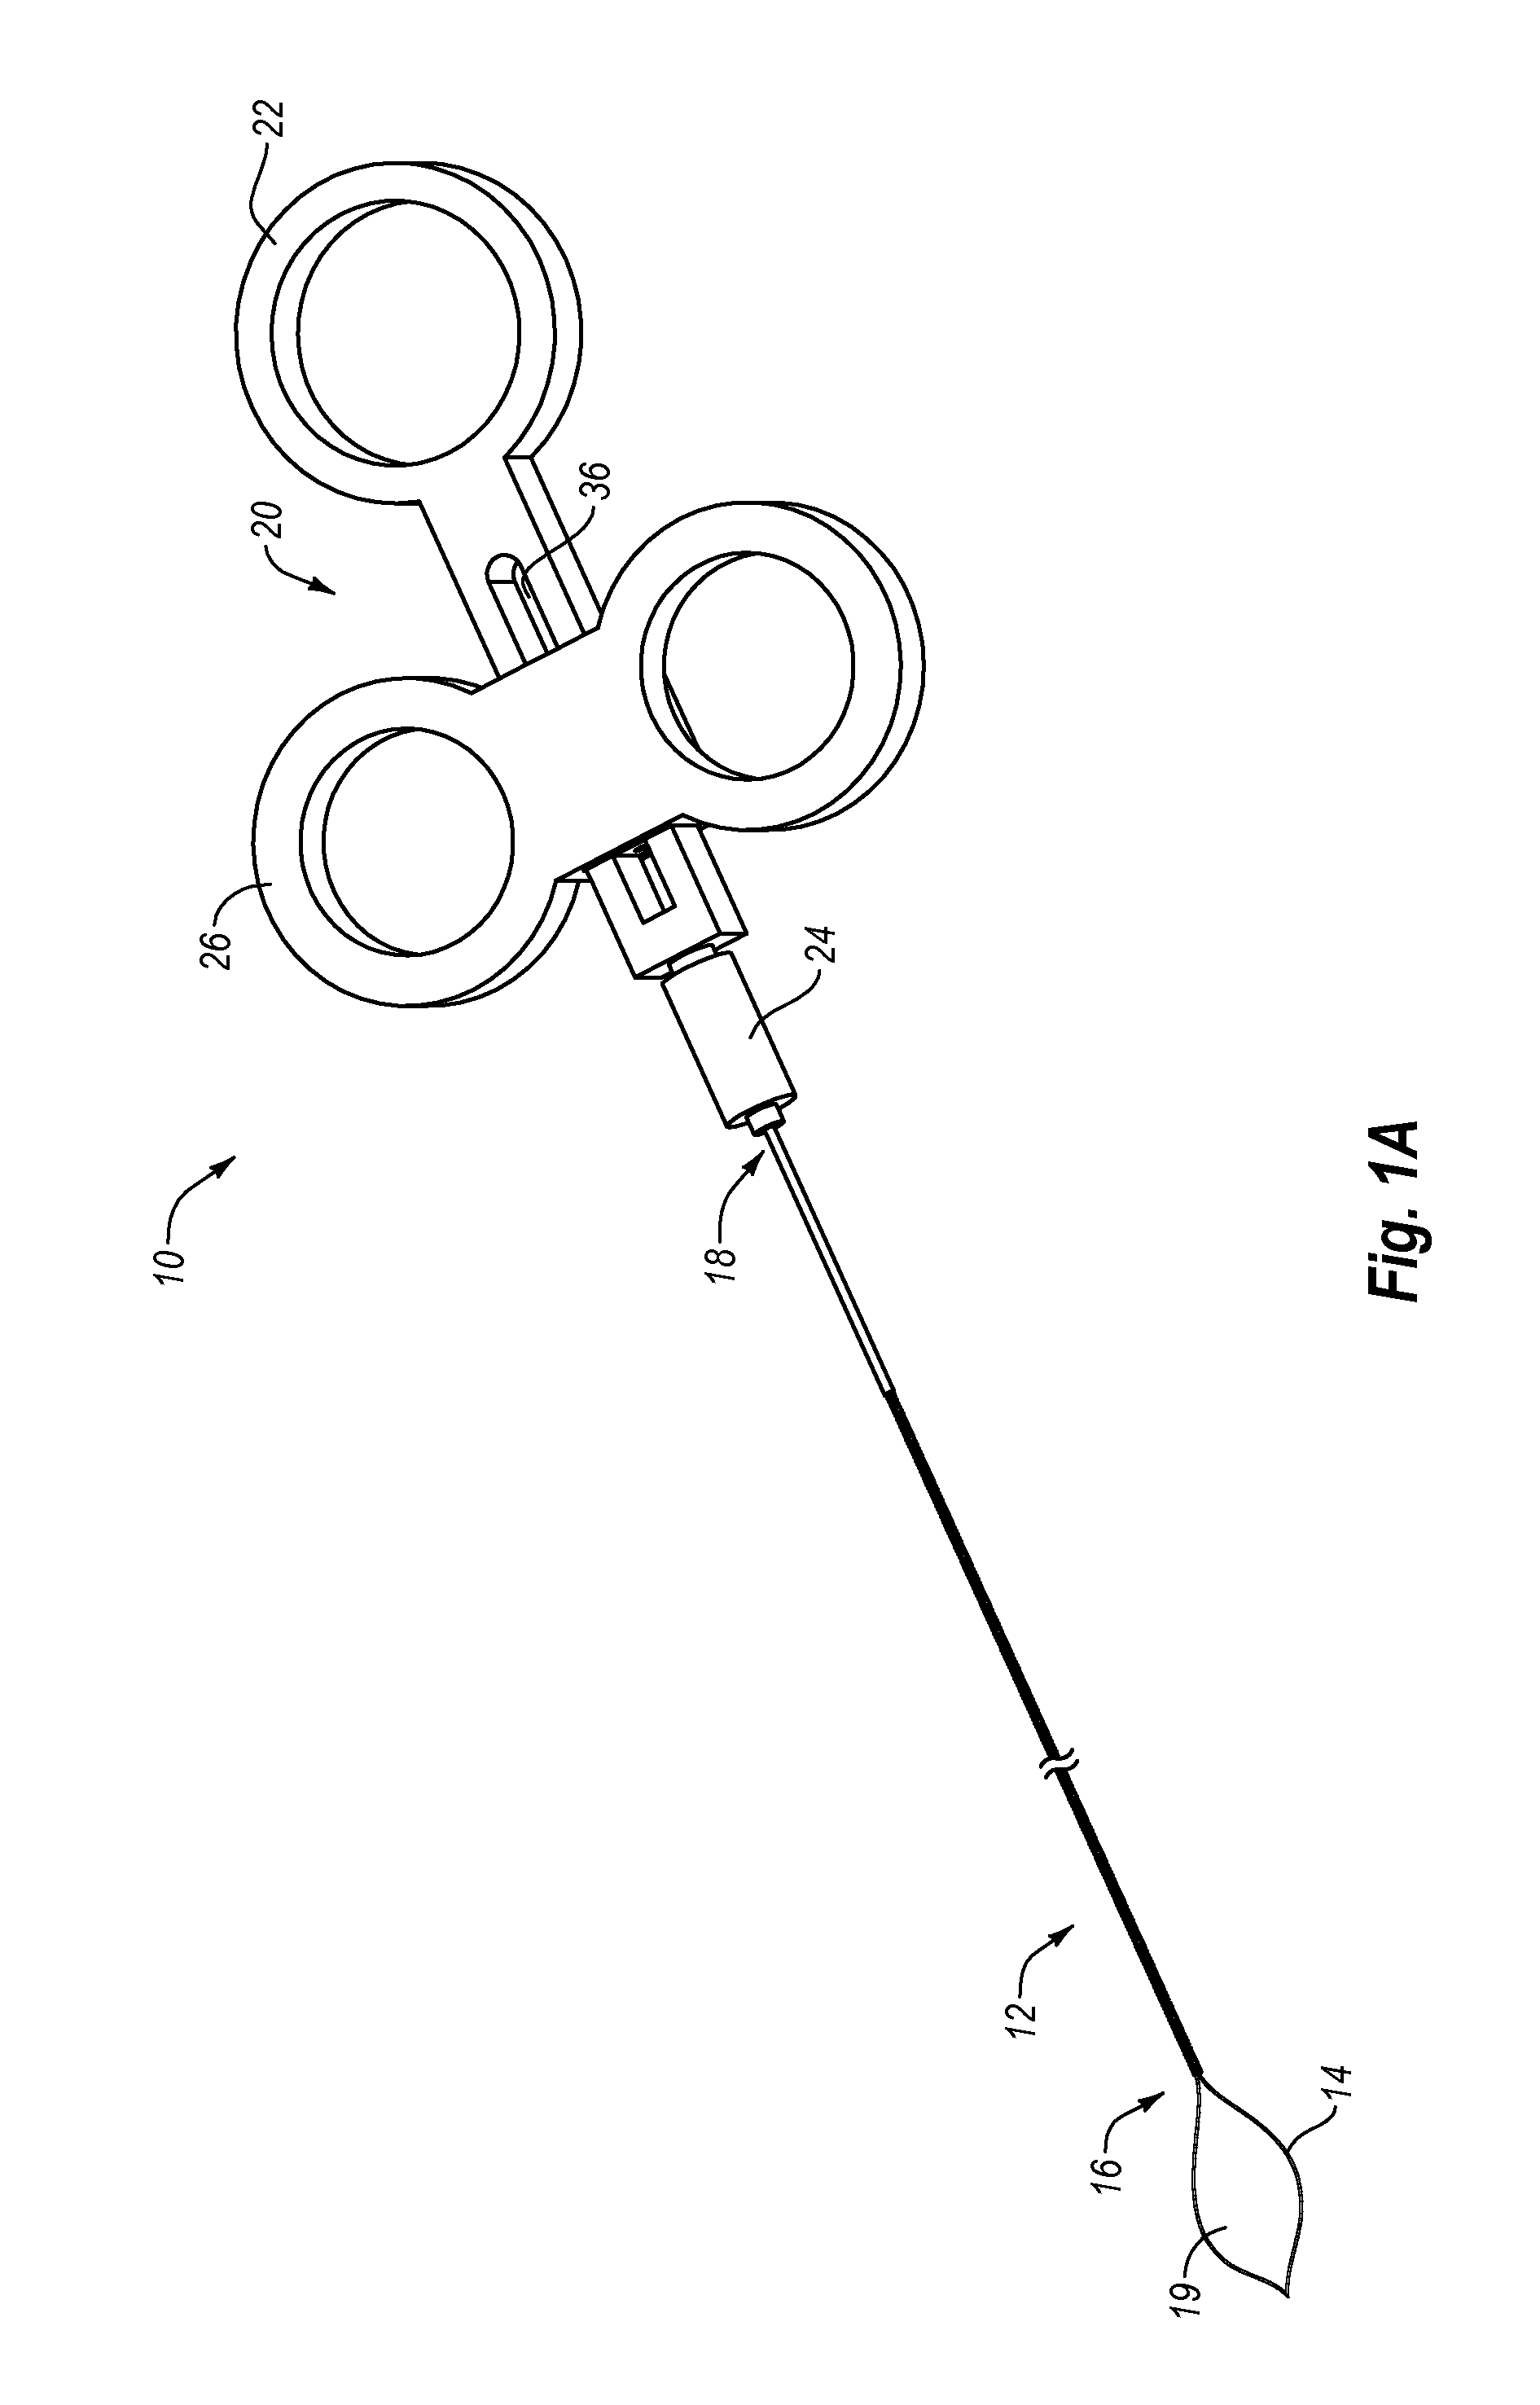 Steerable surgical snare and method of use